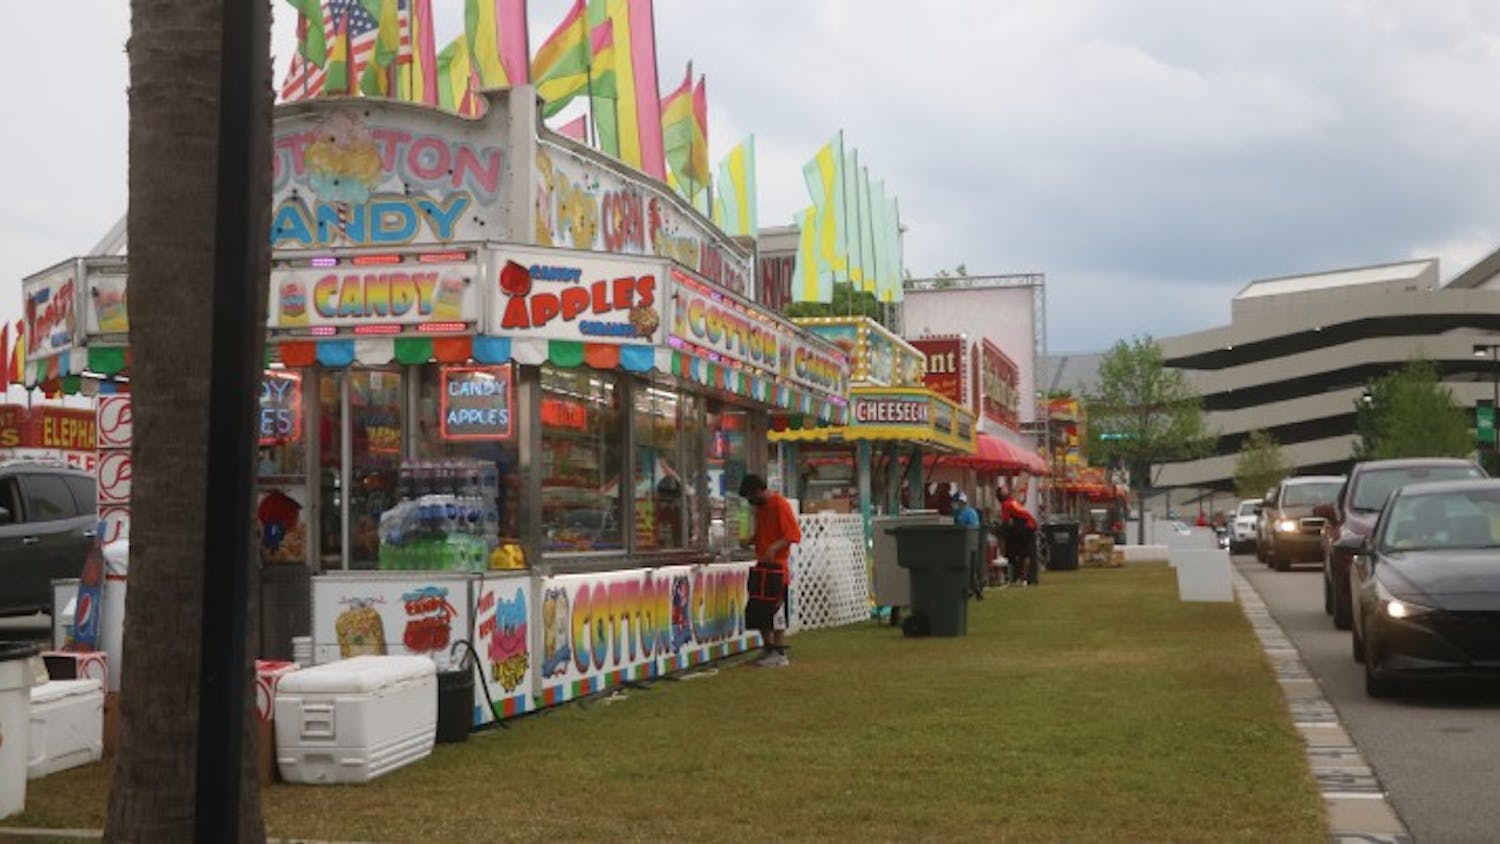 Vendors at the South Carolina drive-thru State Fair take orders from cars and deliver the food directly to them. Customers could order popular fair foods such as cotton candy, fried Oreos and more.